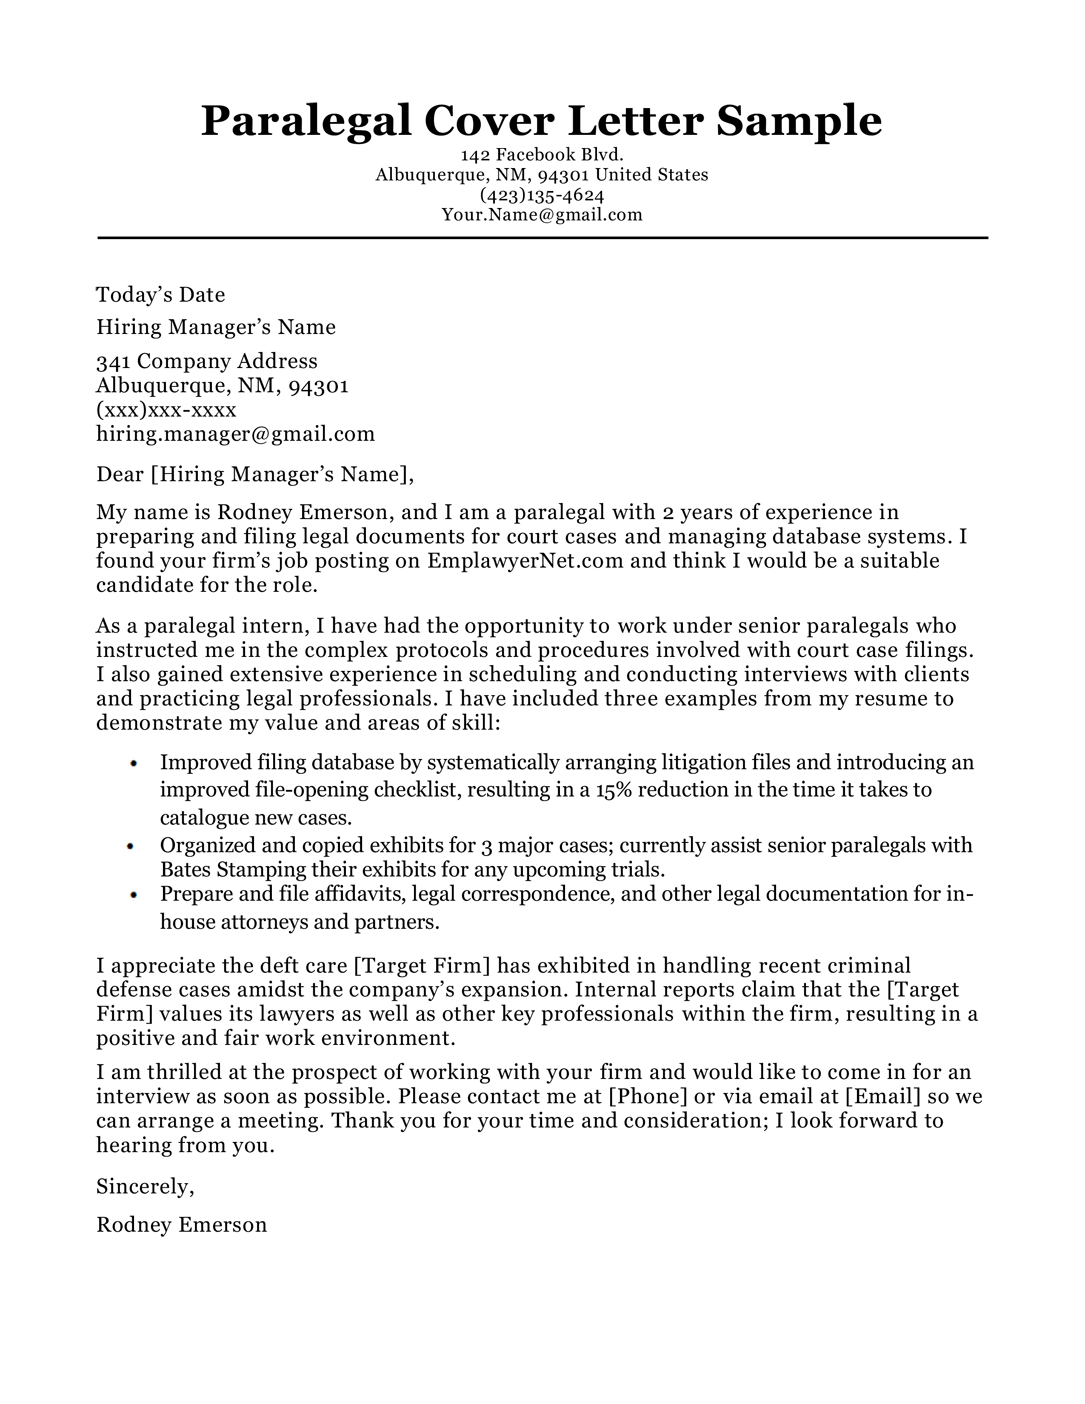 Lawyer Cover Letter Samples from resumecompanion.com